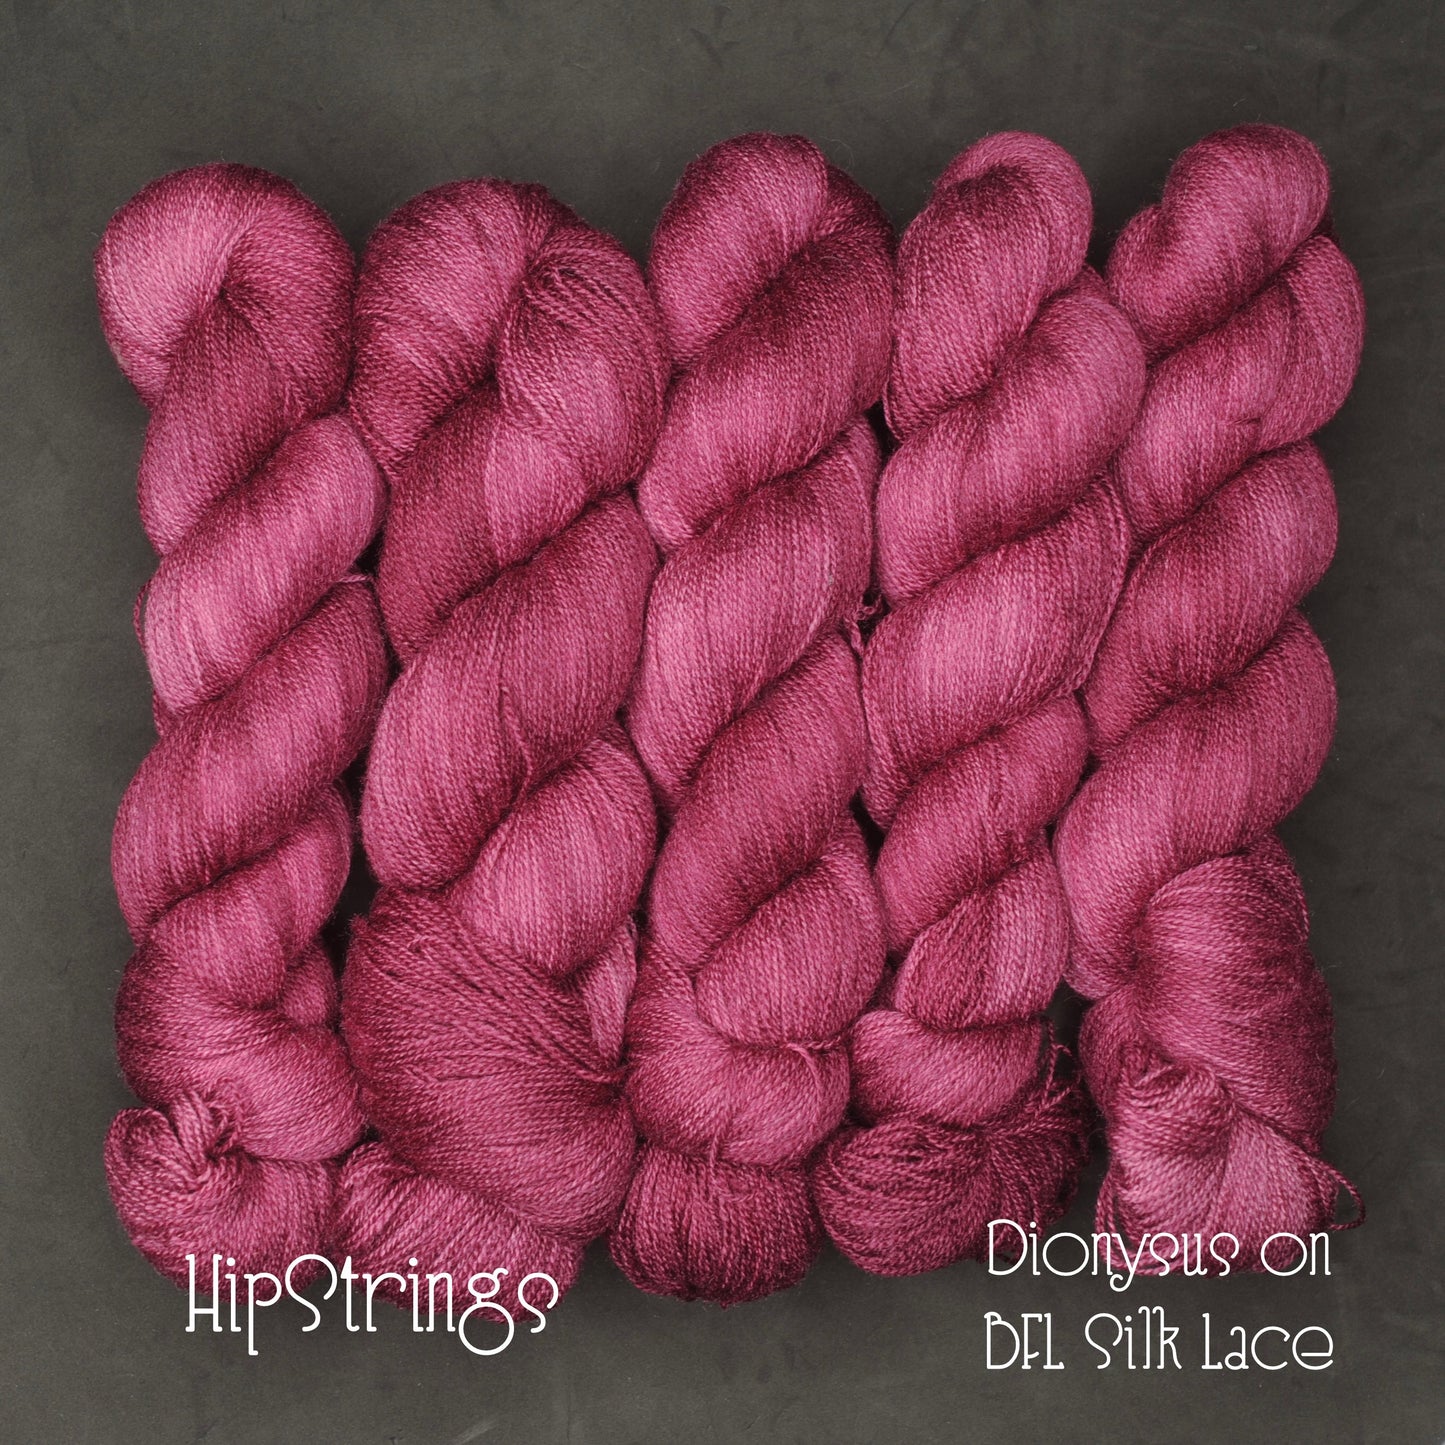 Dionysus on Hand Dyed BFL Silk Lace - 100g